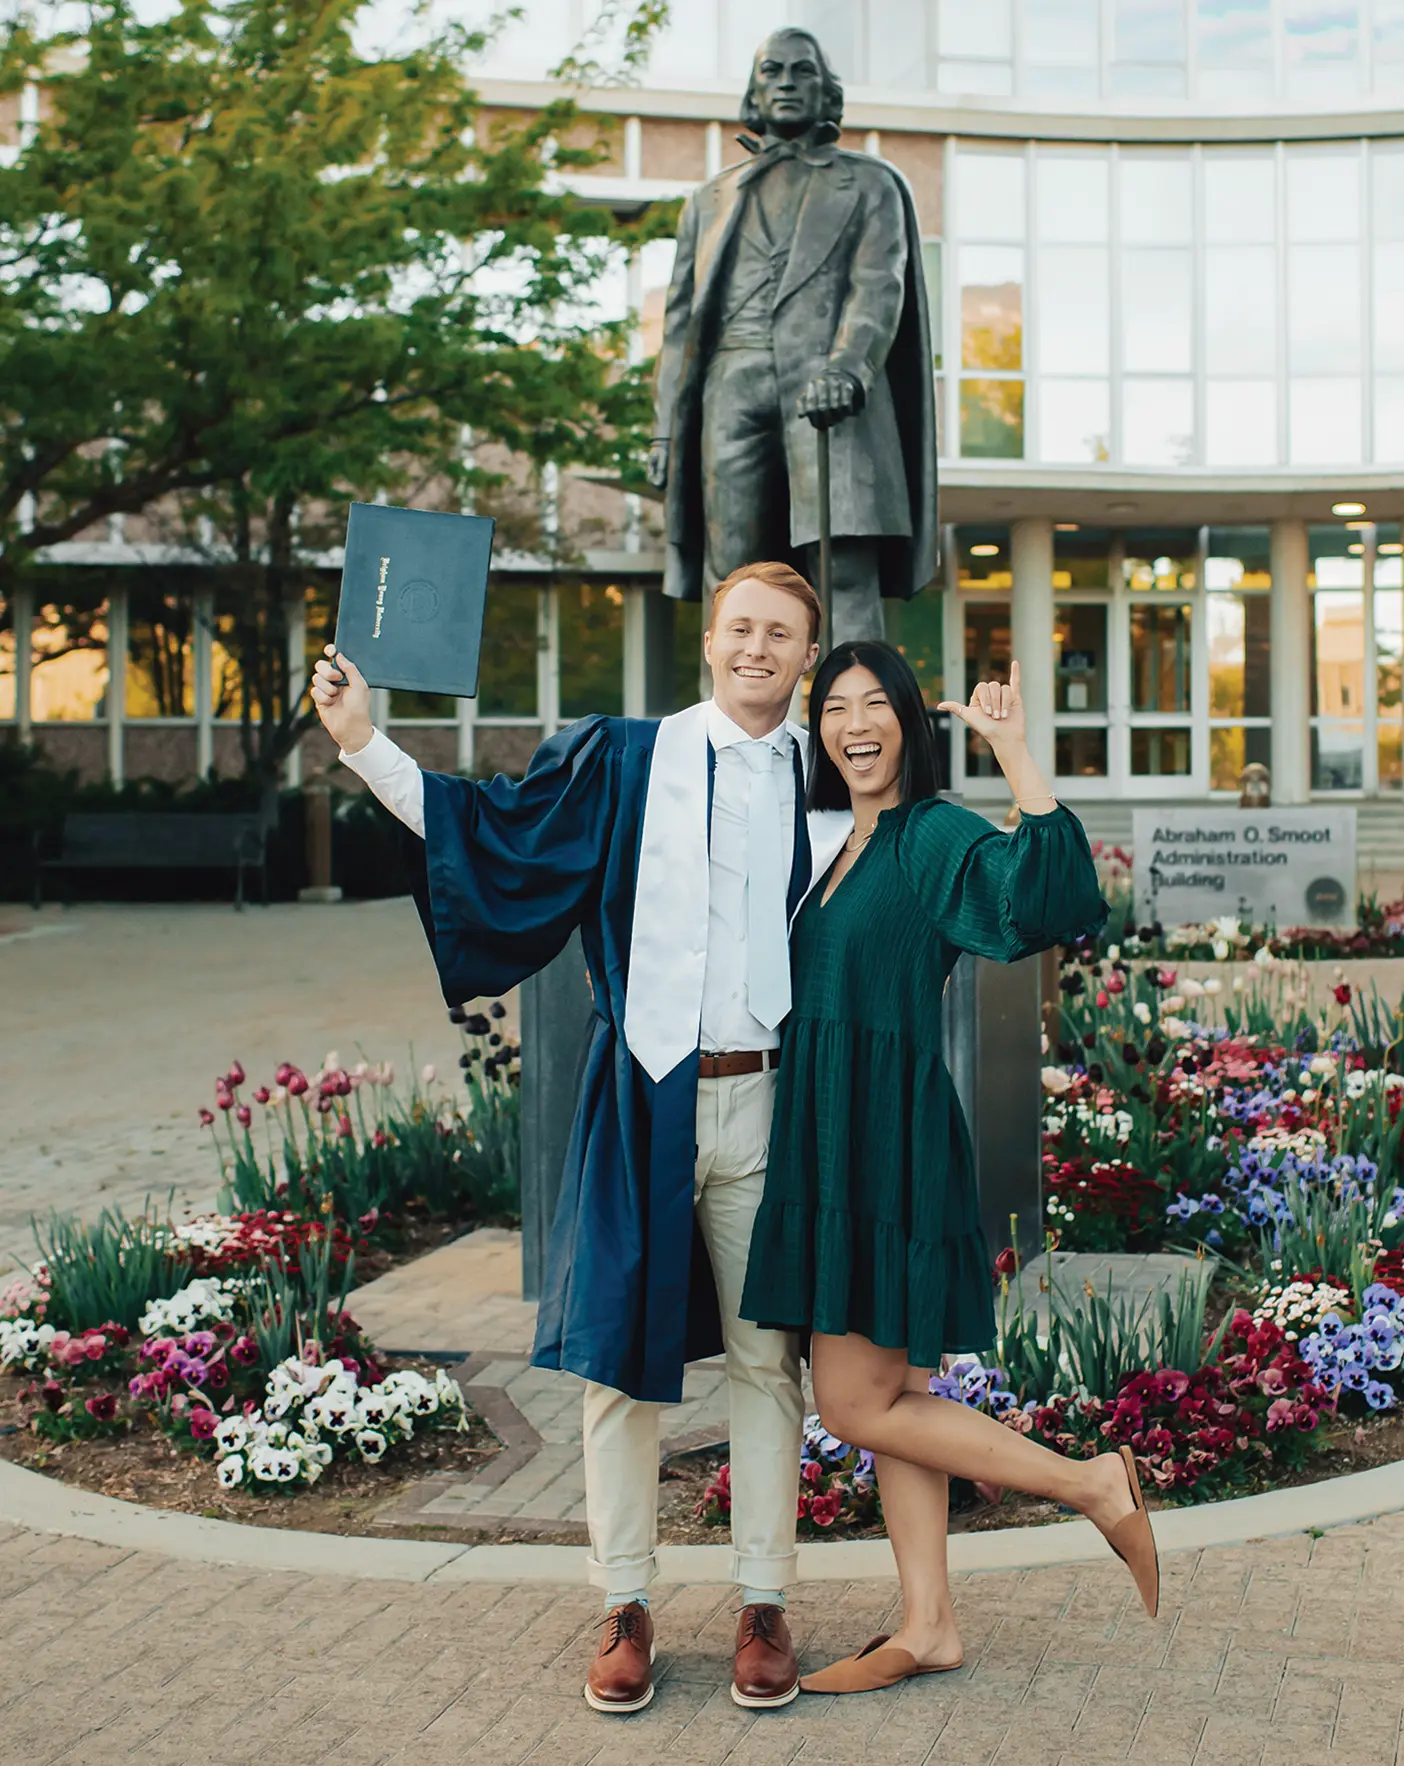 Samuel and Valerie Blackburn stand in front of a statue of Brigham Young, and Samuel wears graduation robes and holds a diploma.